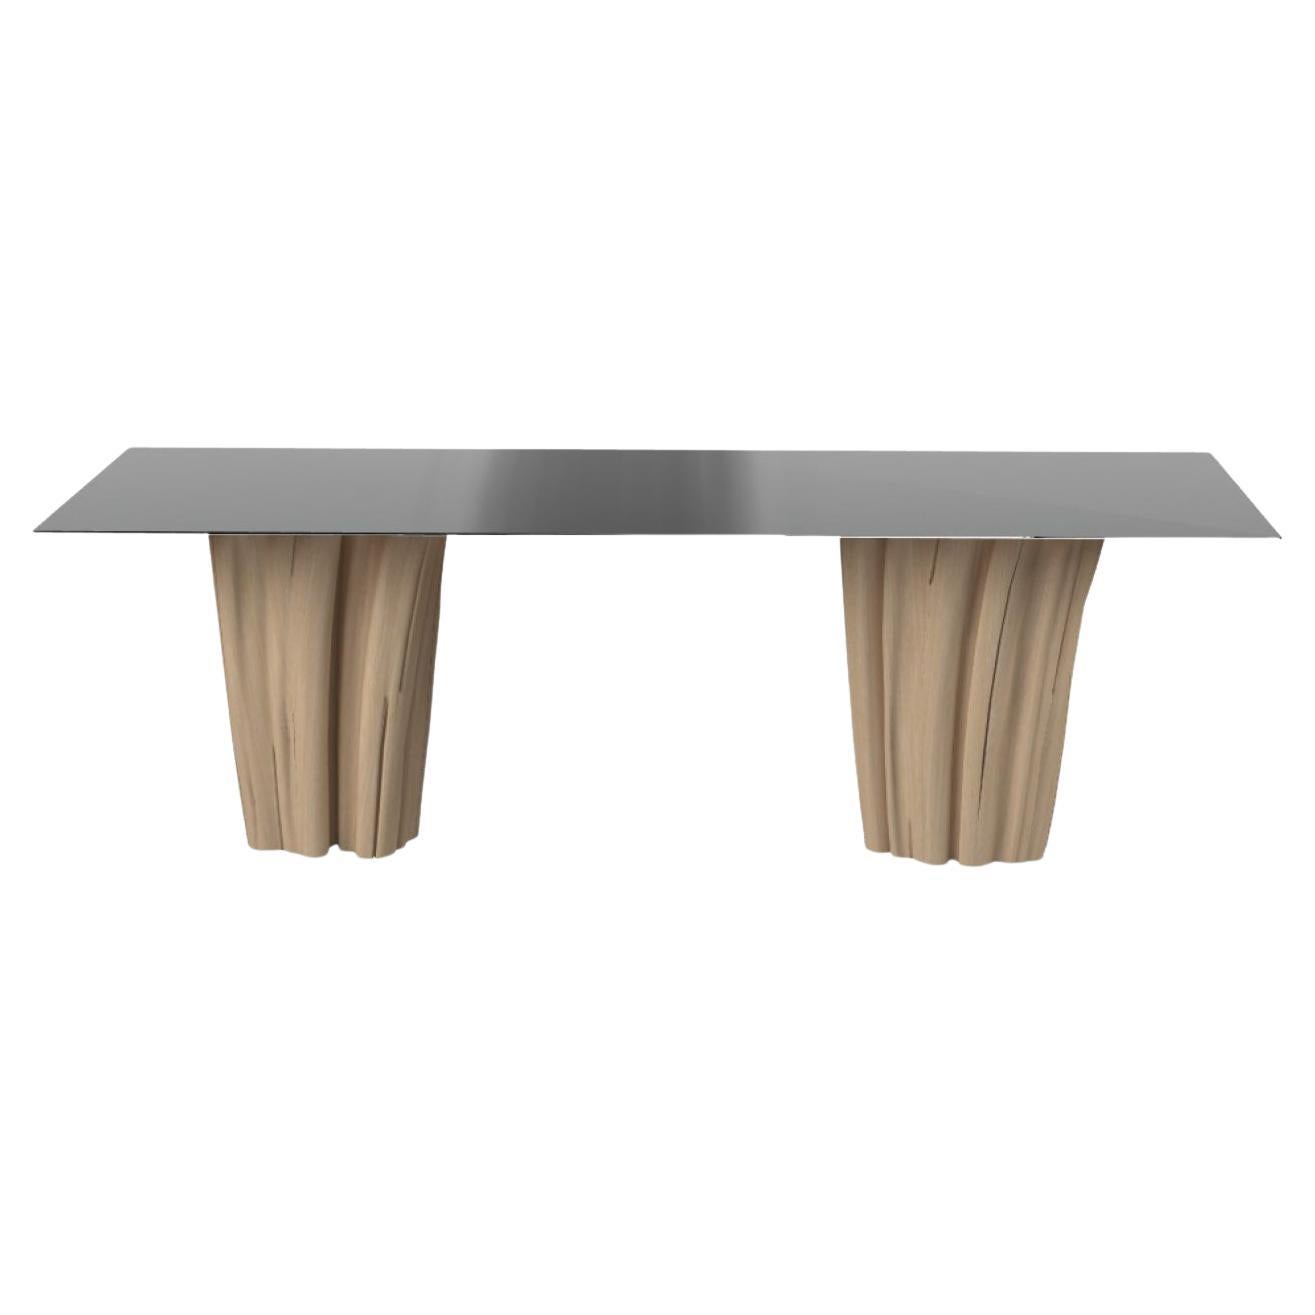 Gervasoni Large Brick Table in Waxed Iron Top with Natural Base by Paola Navone For Sale